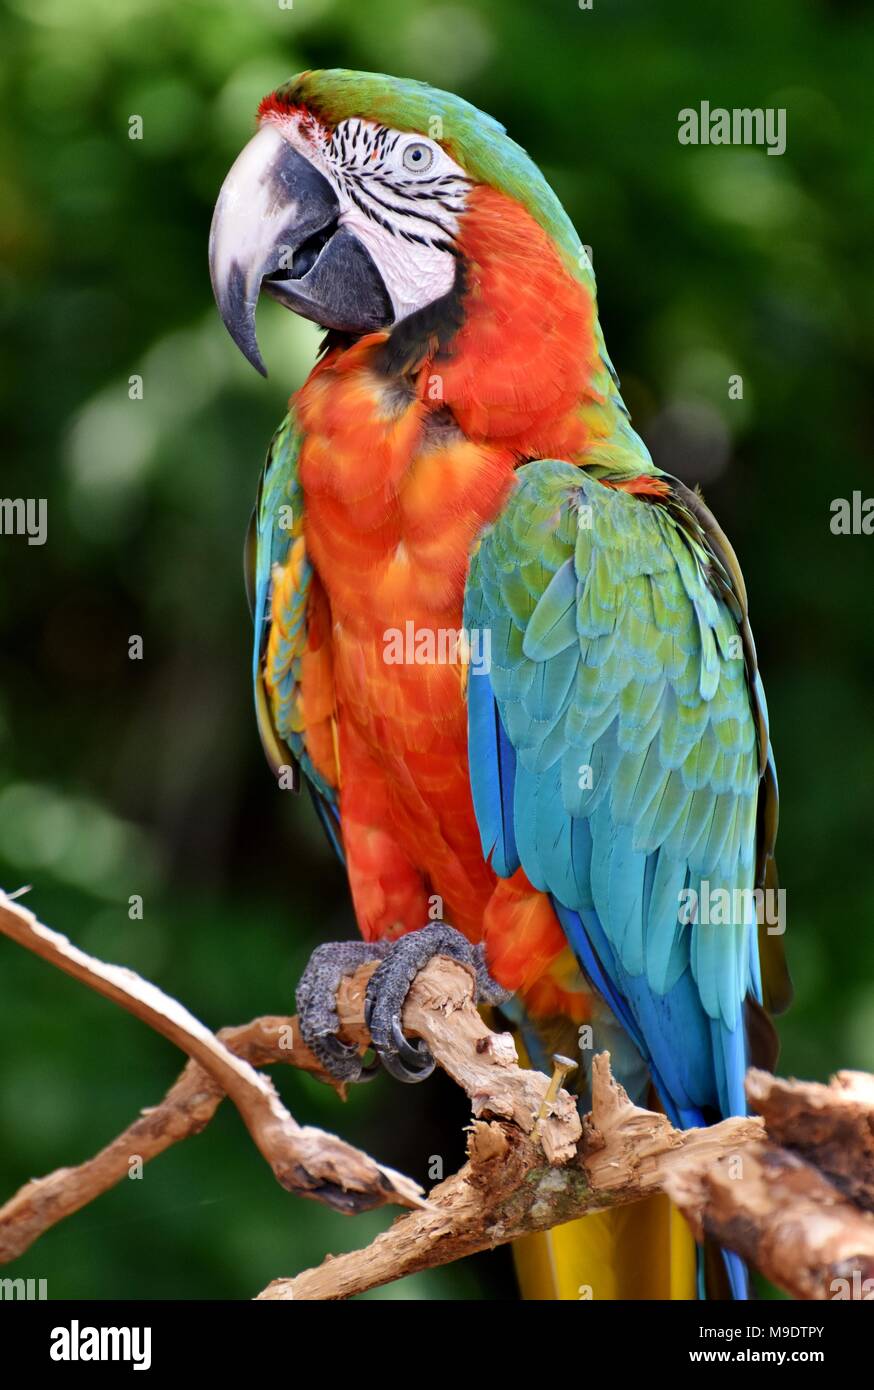 The Harlequin Macaw is a first generation hybrid macaw. It is a cross  between a Blue and Gold Macaw (Ara ararauna) and a Green-winged Macaw Stock  Photo - Alamy